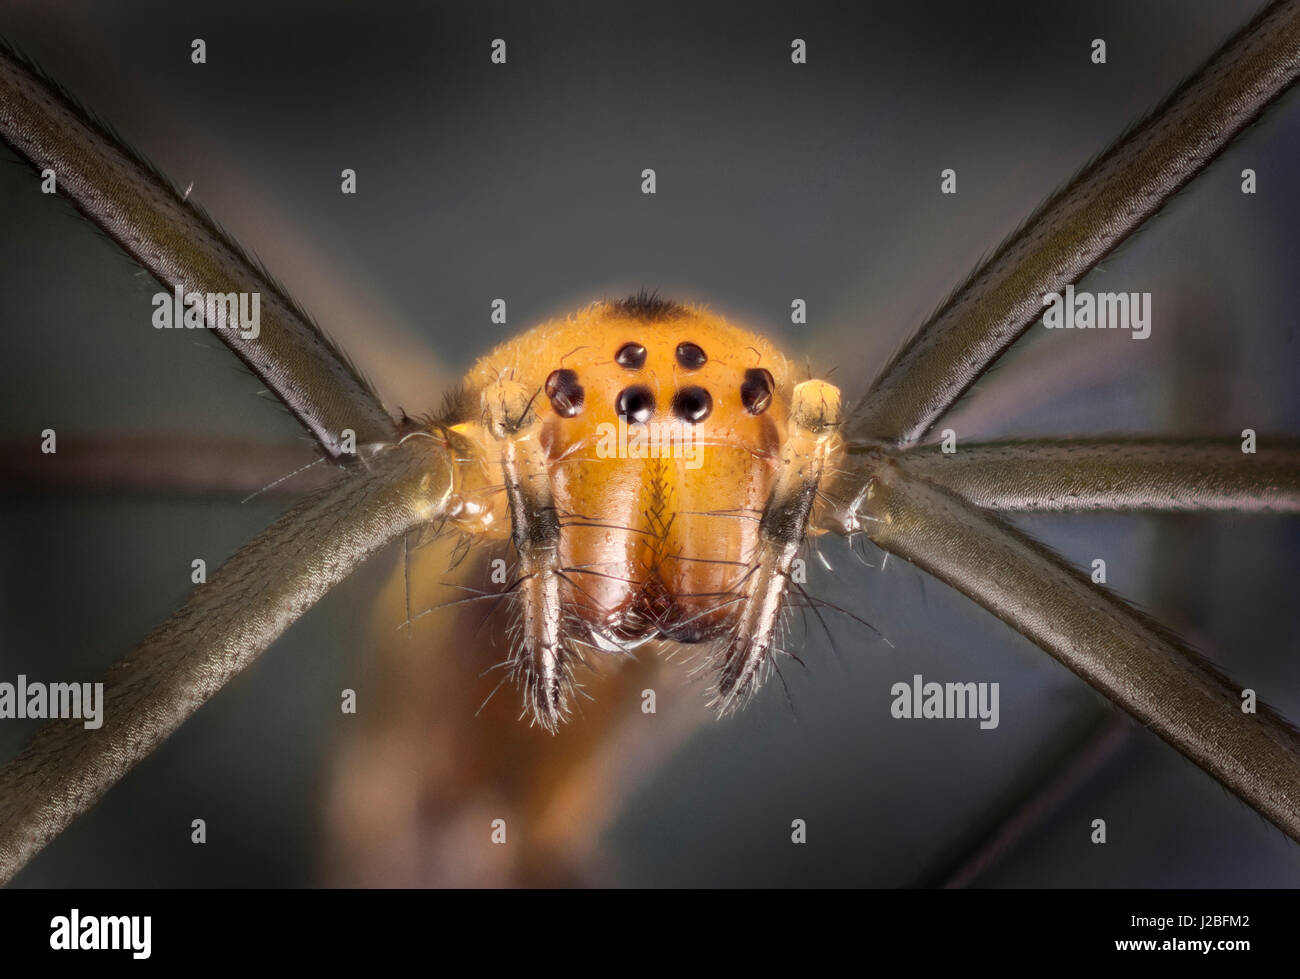 Malaysia forest spider, high macro 'stacked' image, front view showing eyes & palps Stock Photo